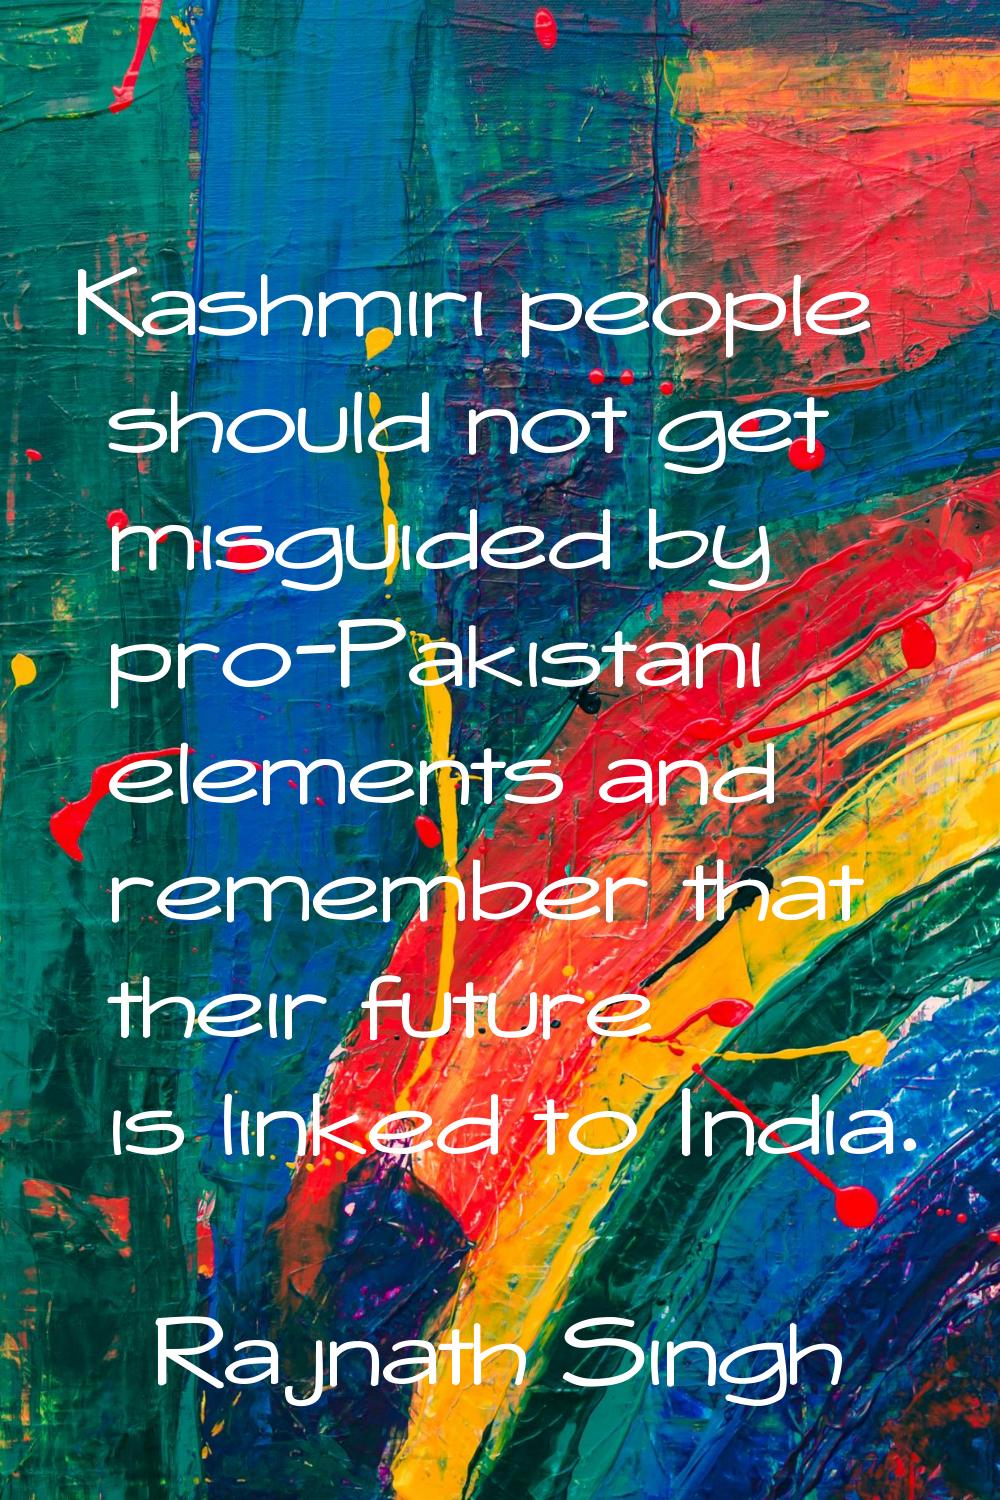 Kashmiri people should not get misguided by pro-Pakistani elements and remember that their future i